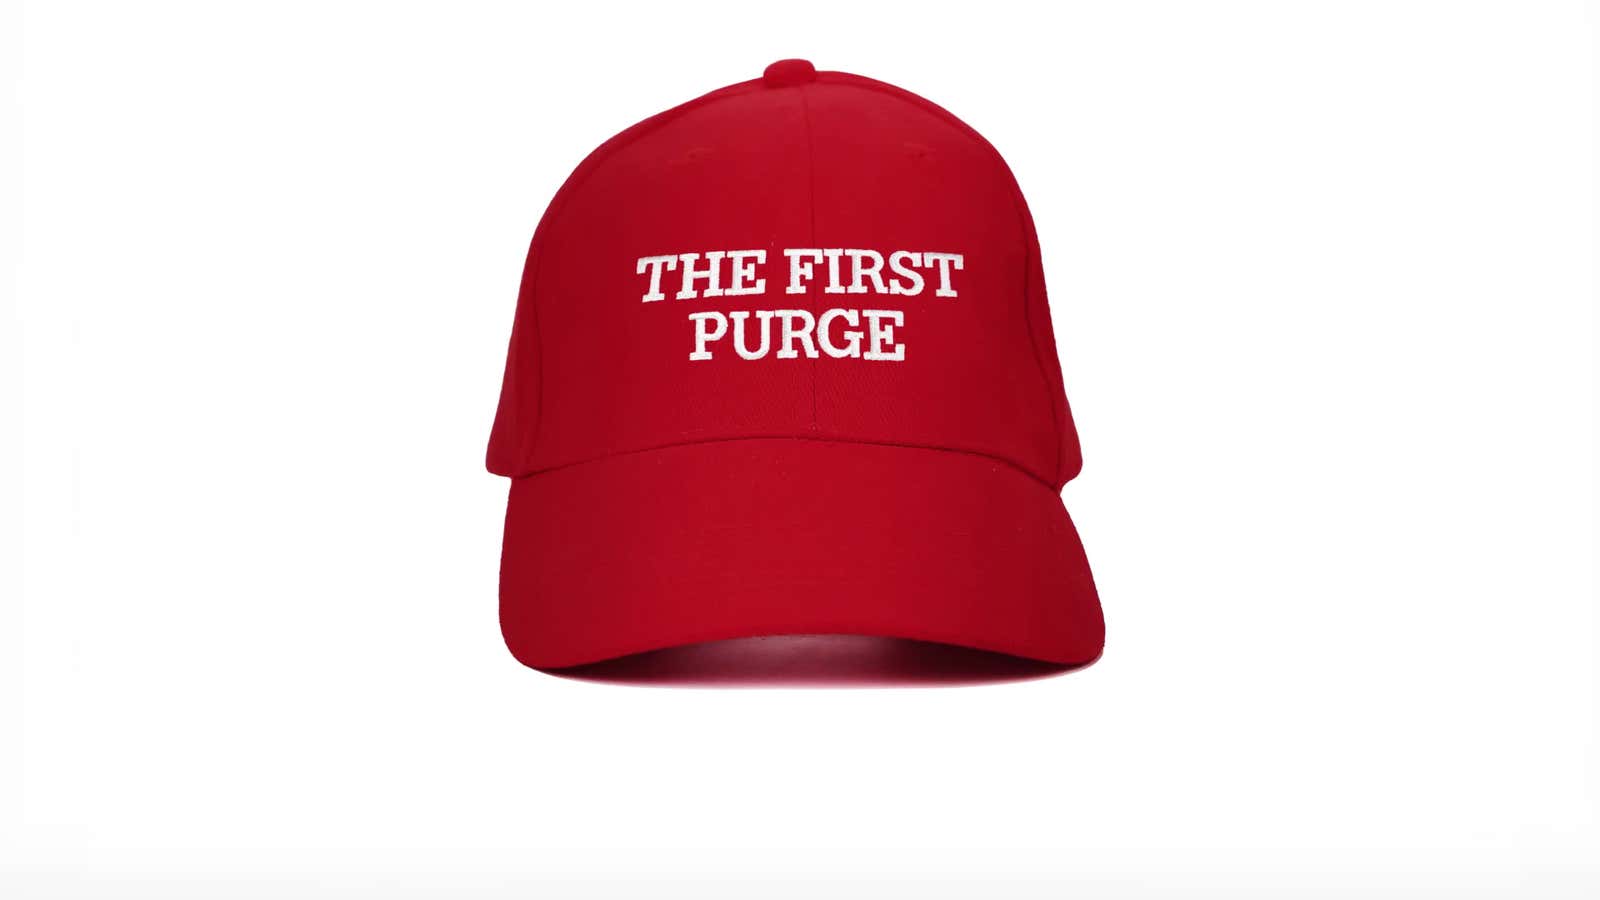 Quiz: Trump’s State of the Union address or “The First Purge” trailer?